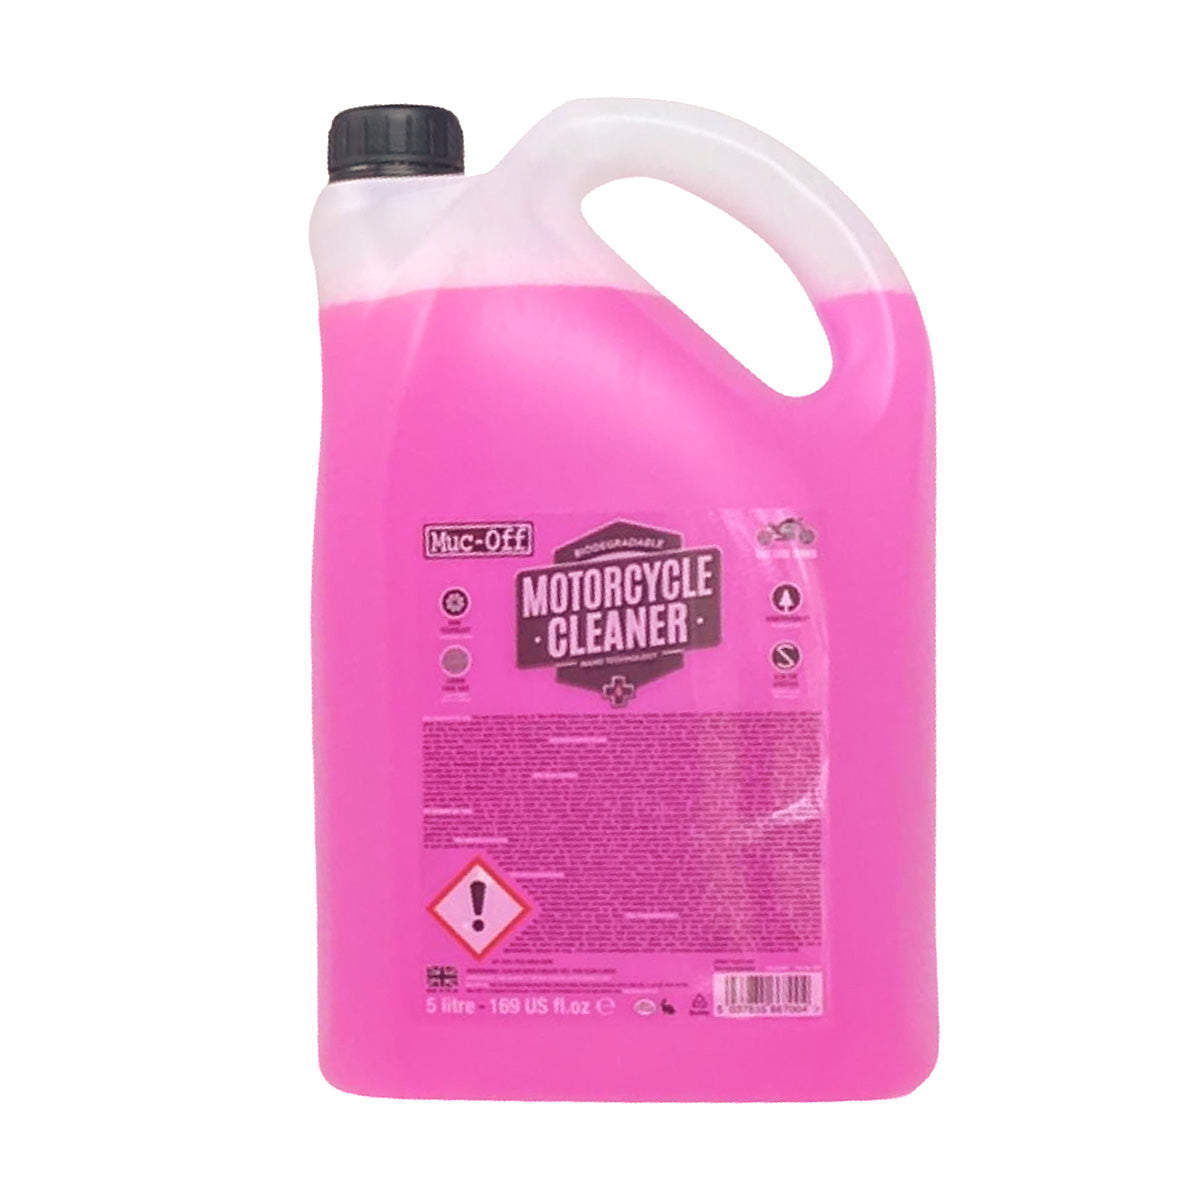 Muc-Off Motorcycle Cleaner 5L